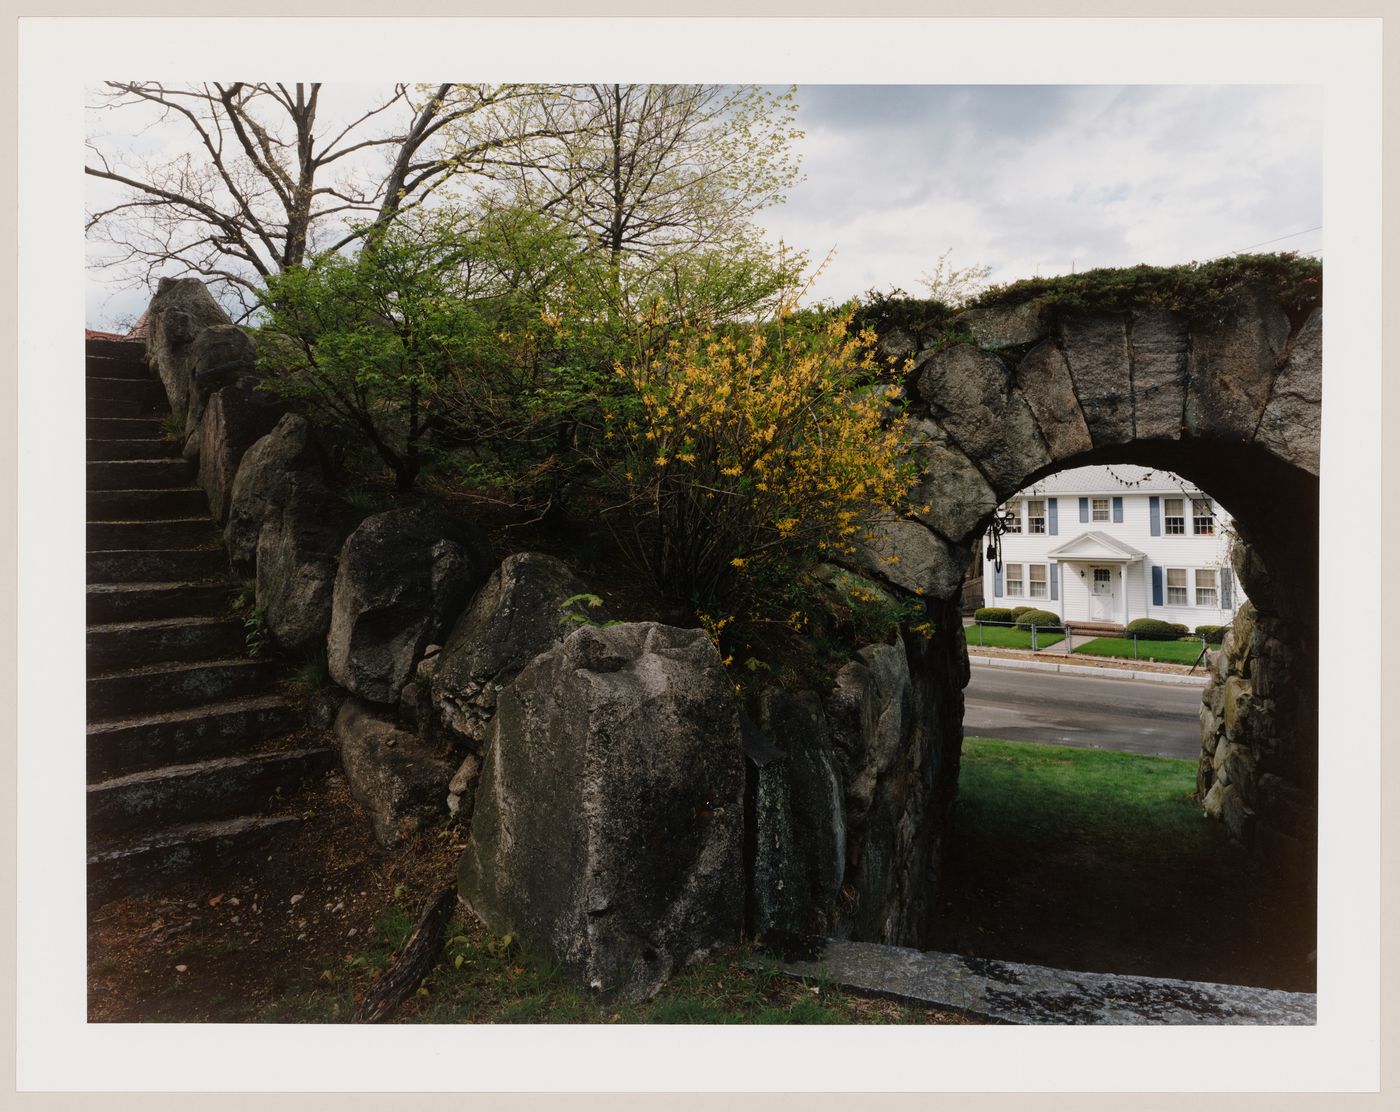 Viewing Olmsted: View of The Rockery ("Cairn"), North Easton, Massachusetts